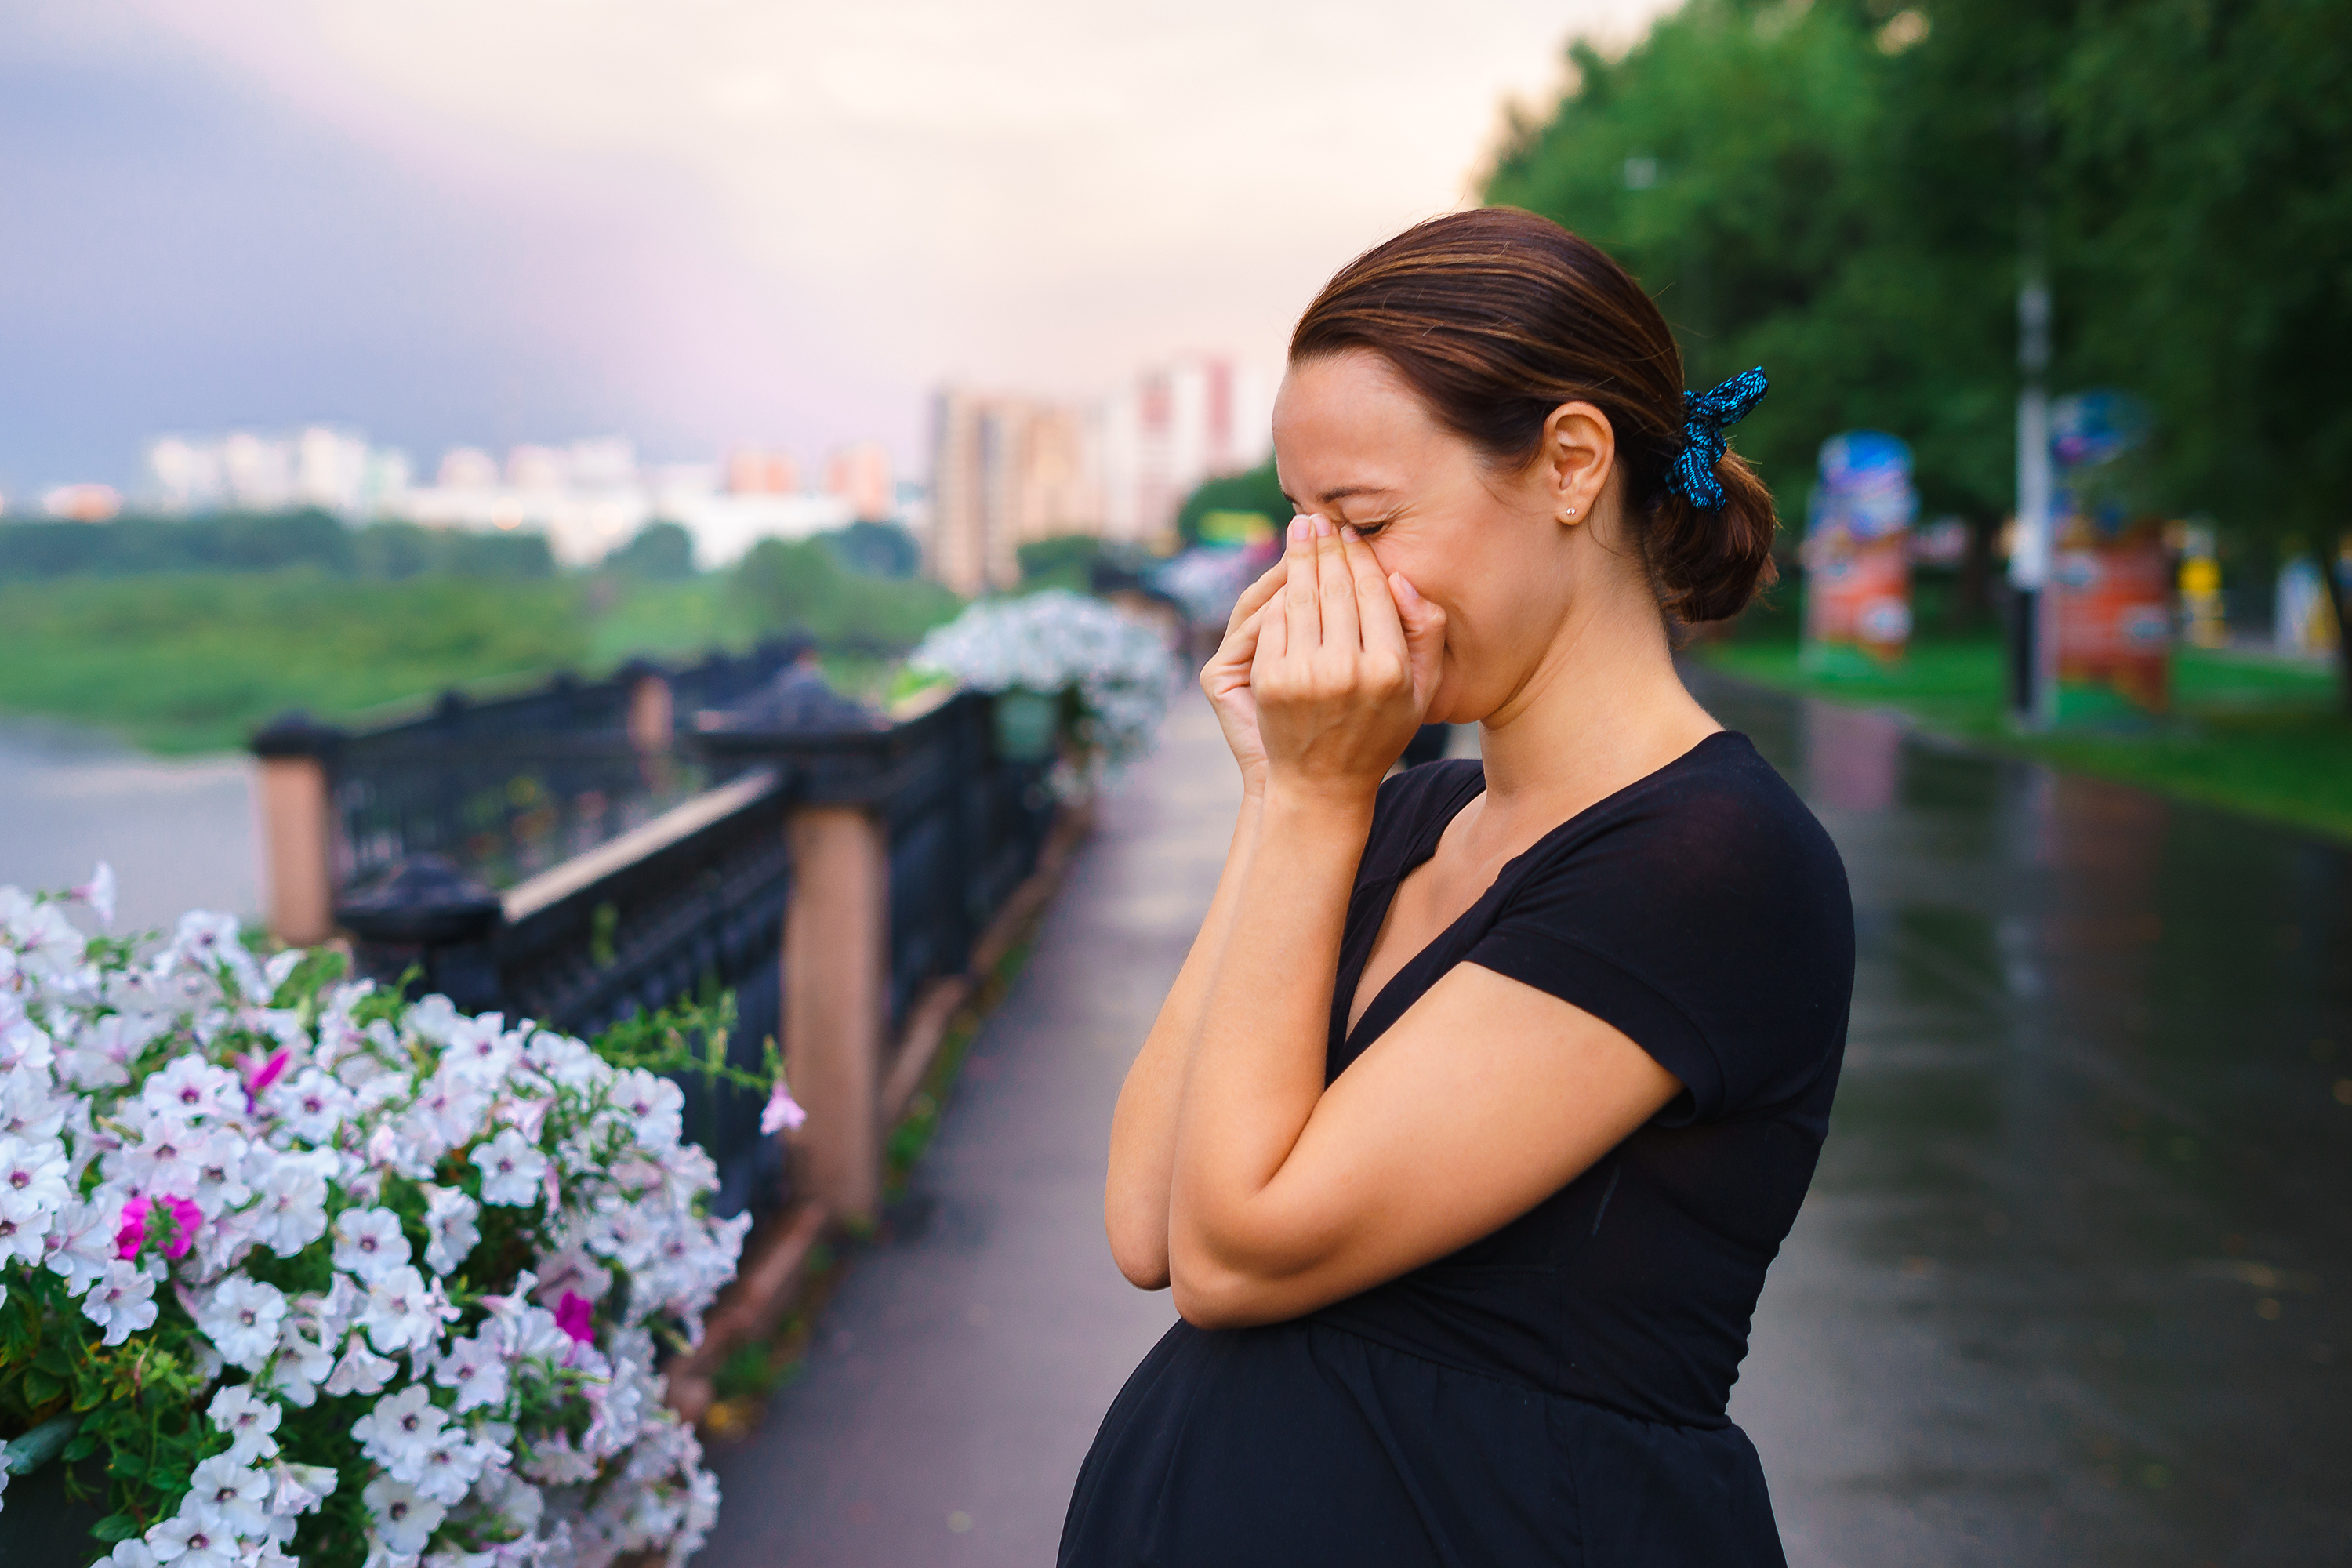 A sad pregnant woman crying in the street | Source: Shutterstock